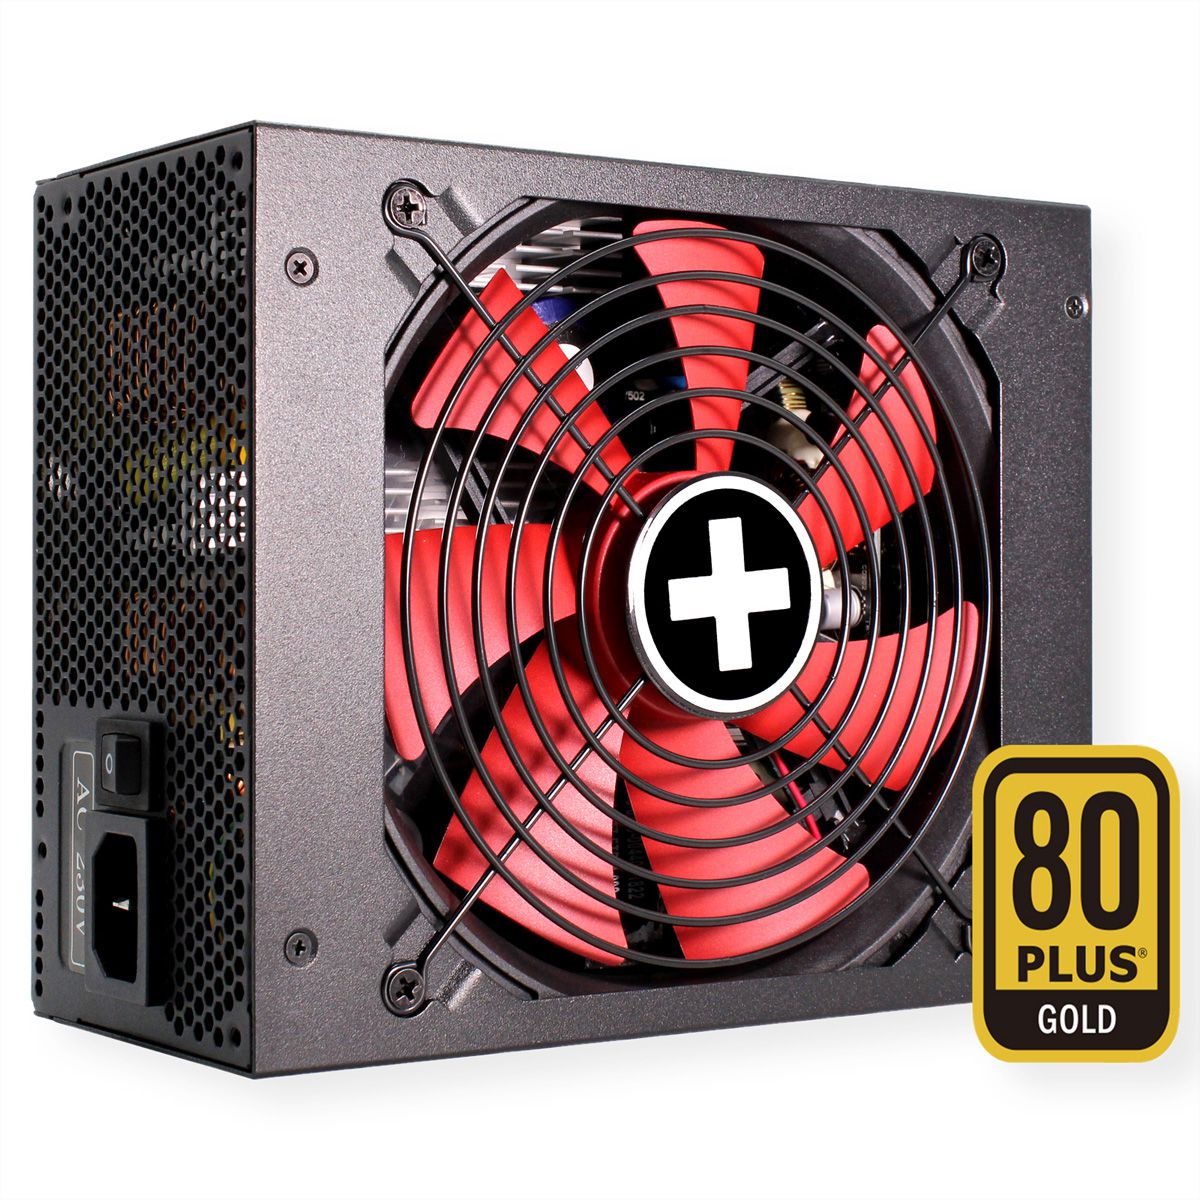 Xilence XP750MR9 750W Alimentation PC, semi modulaire, 80+ Gold, Gaming,  ATX - SECOMP France